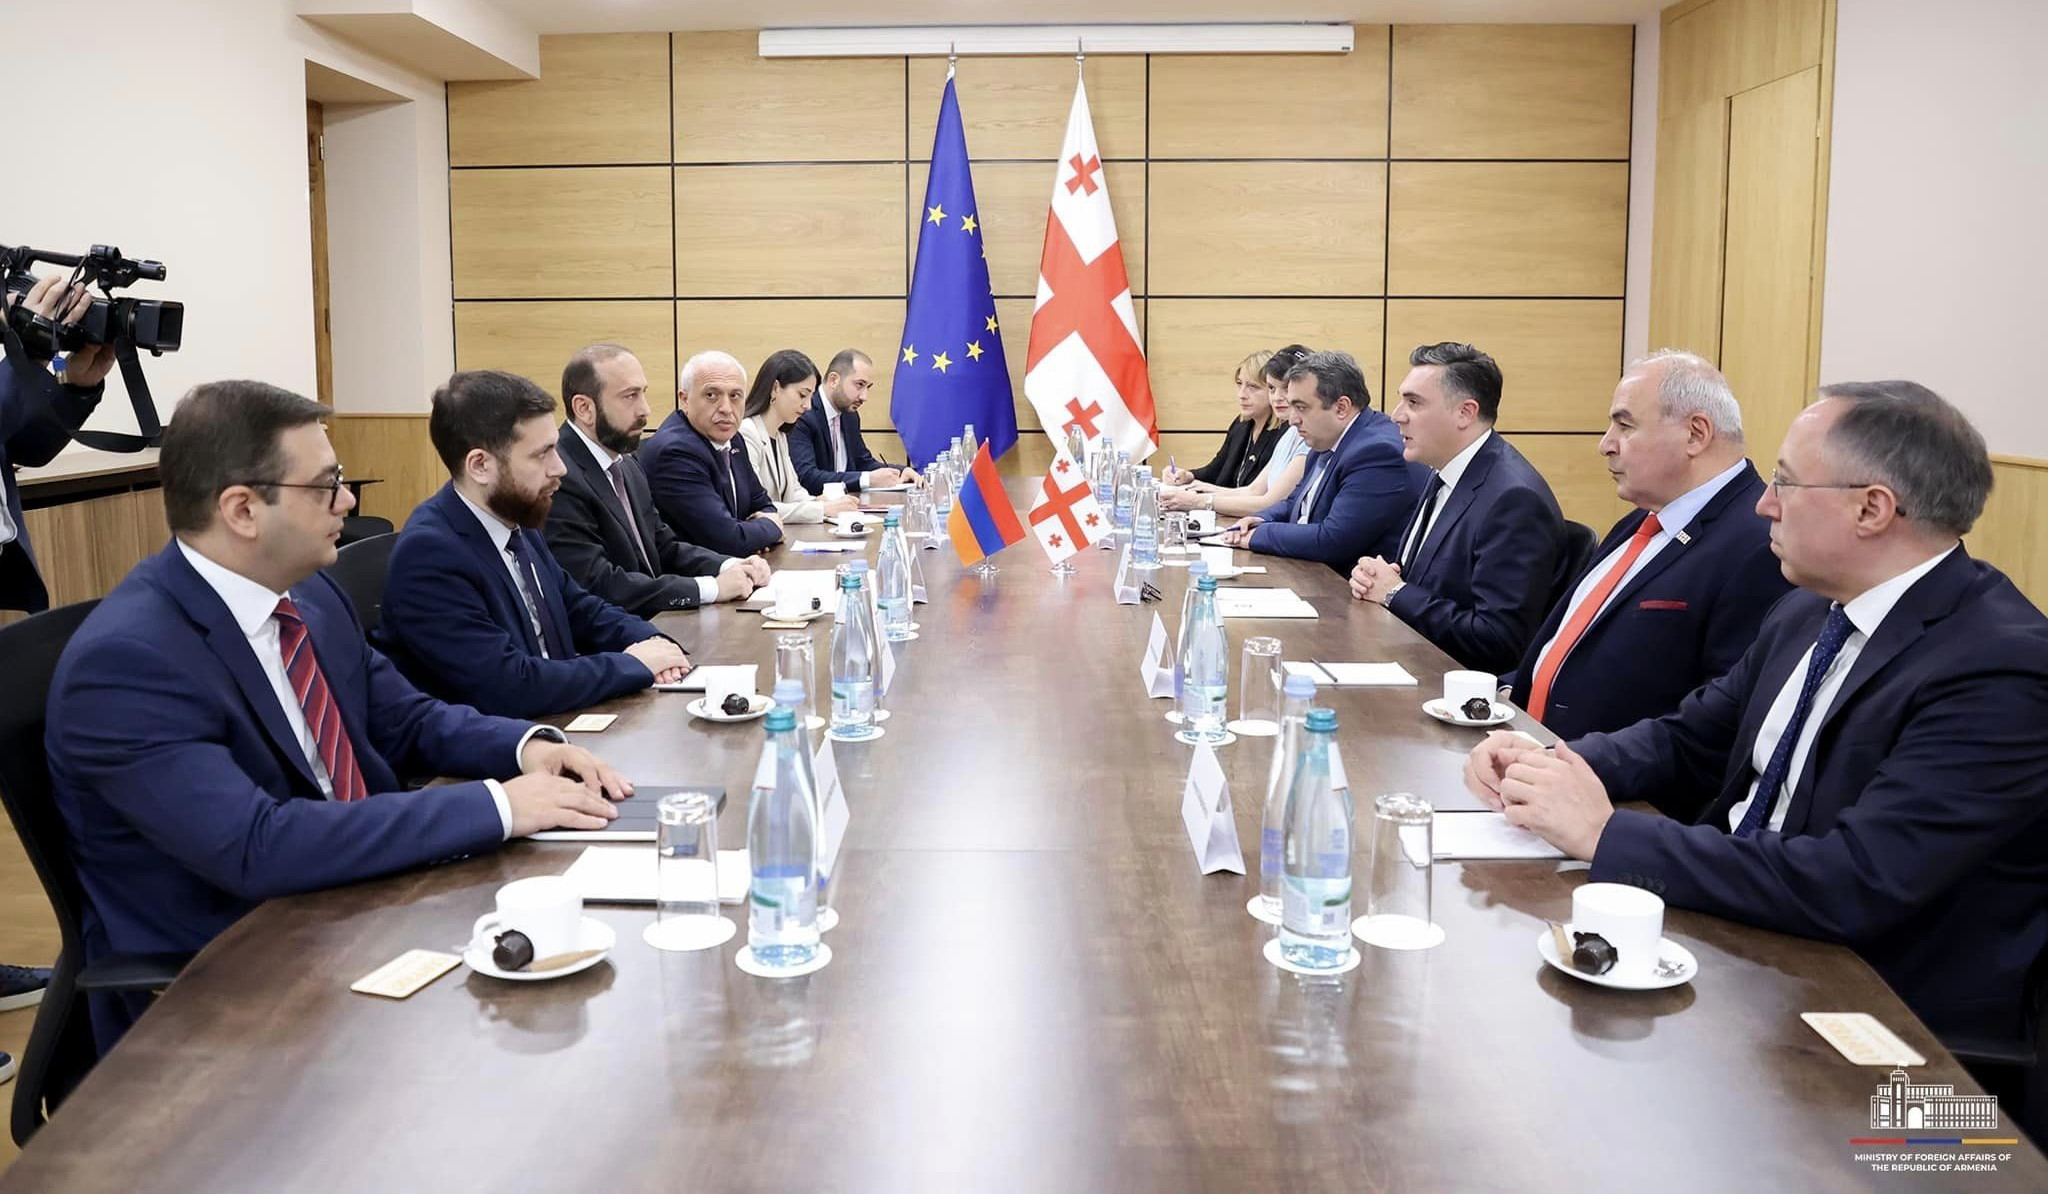 Meeting of the foreign ministers of Armenia and Georgia with expanded composition is underway